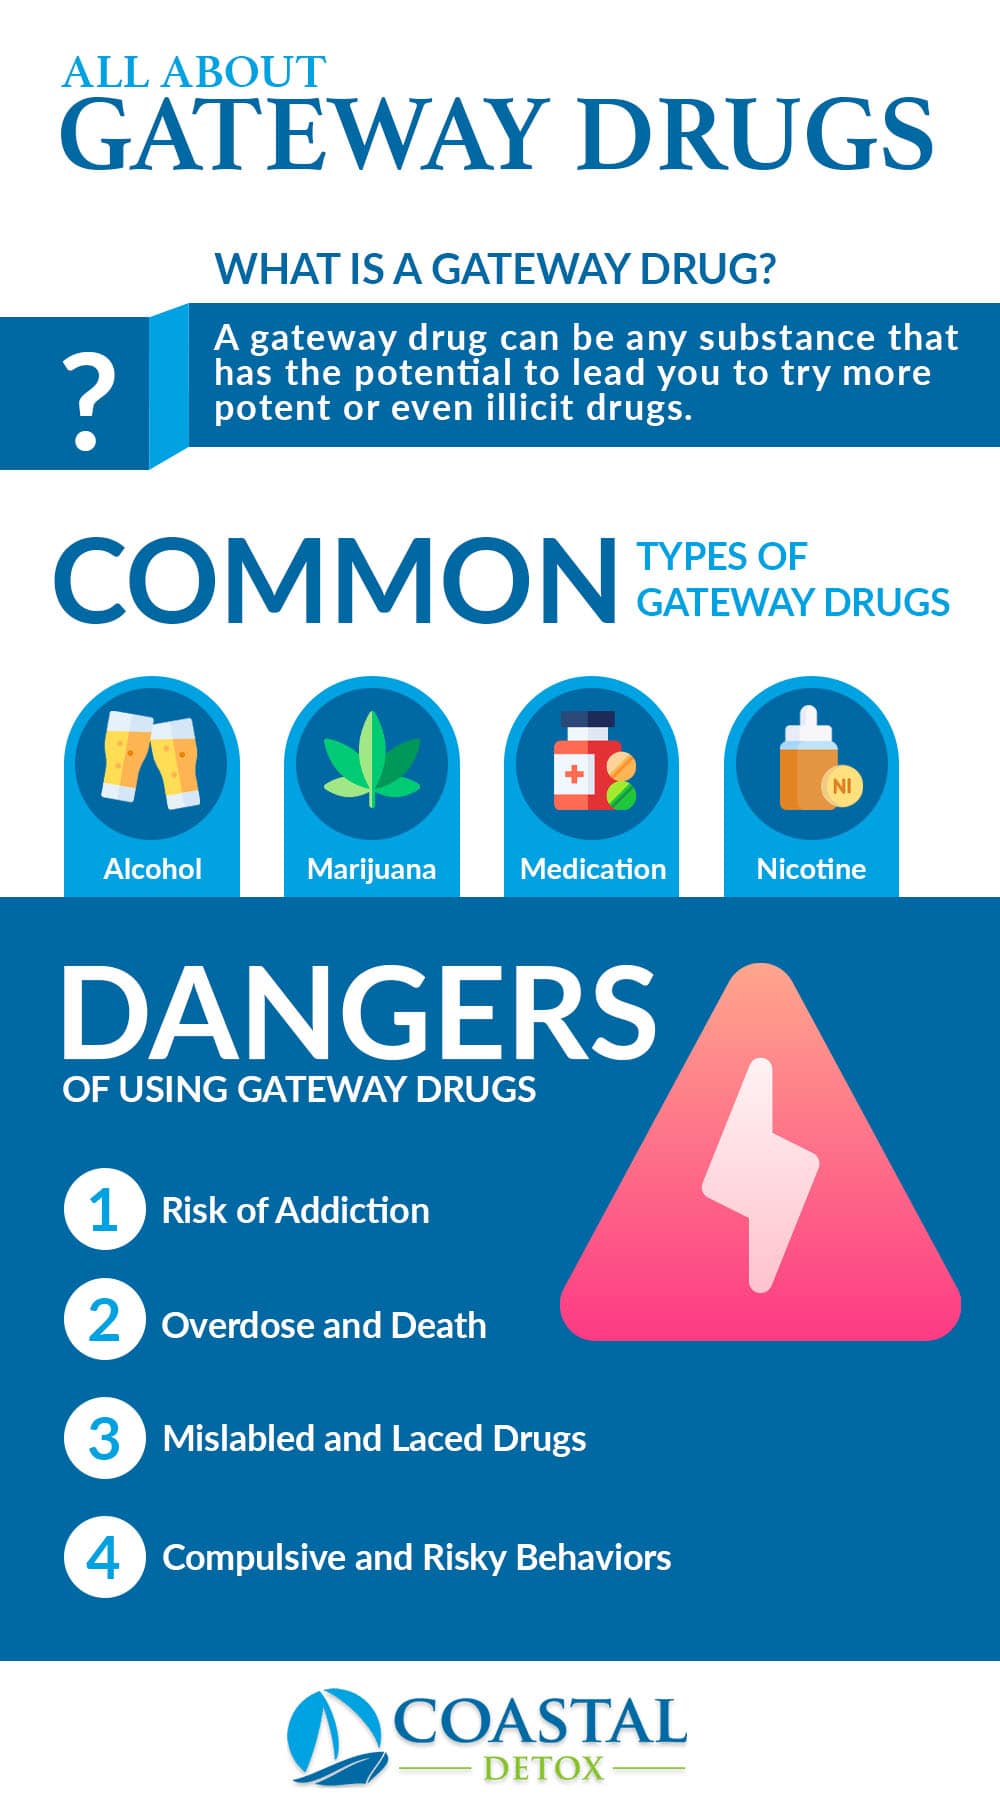 The Dangers of Gateway Drugs infographic